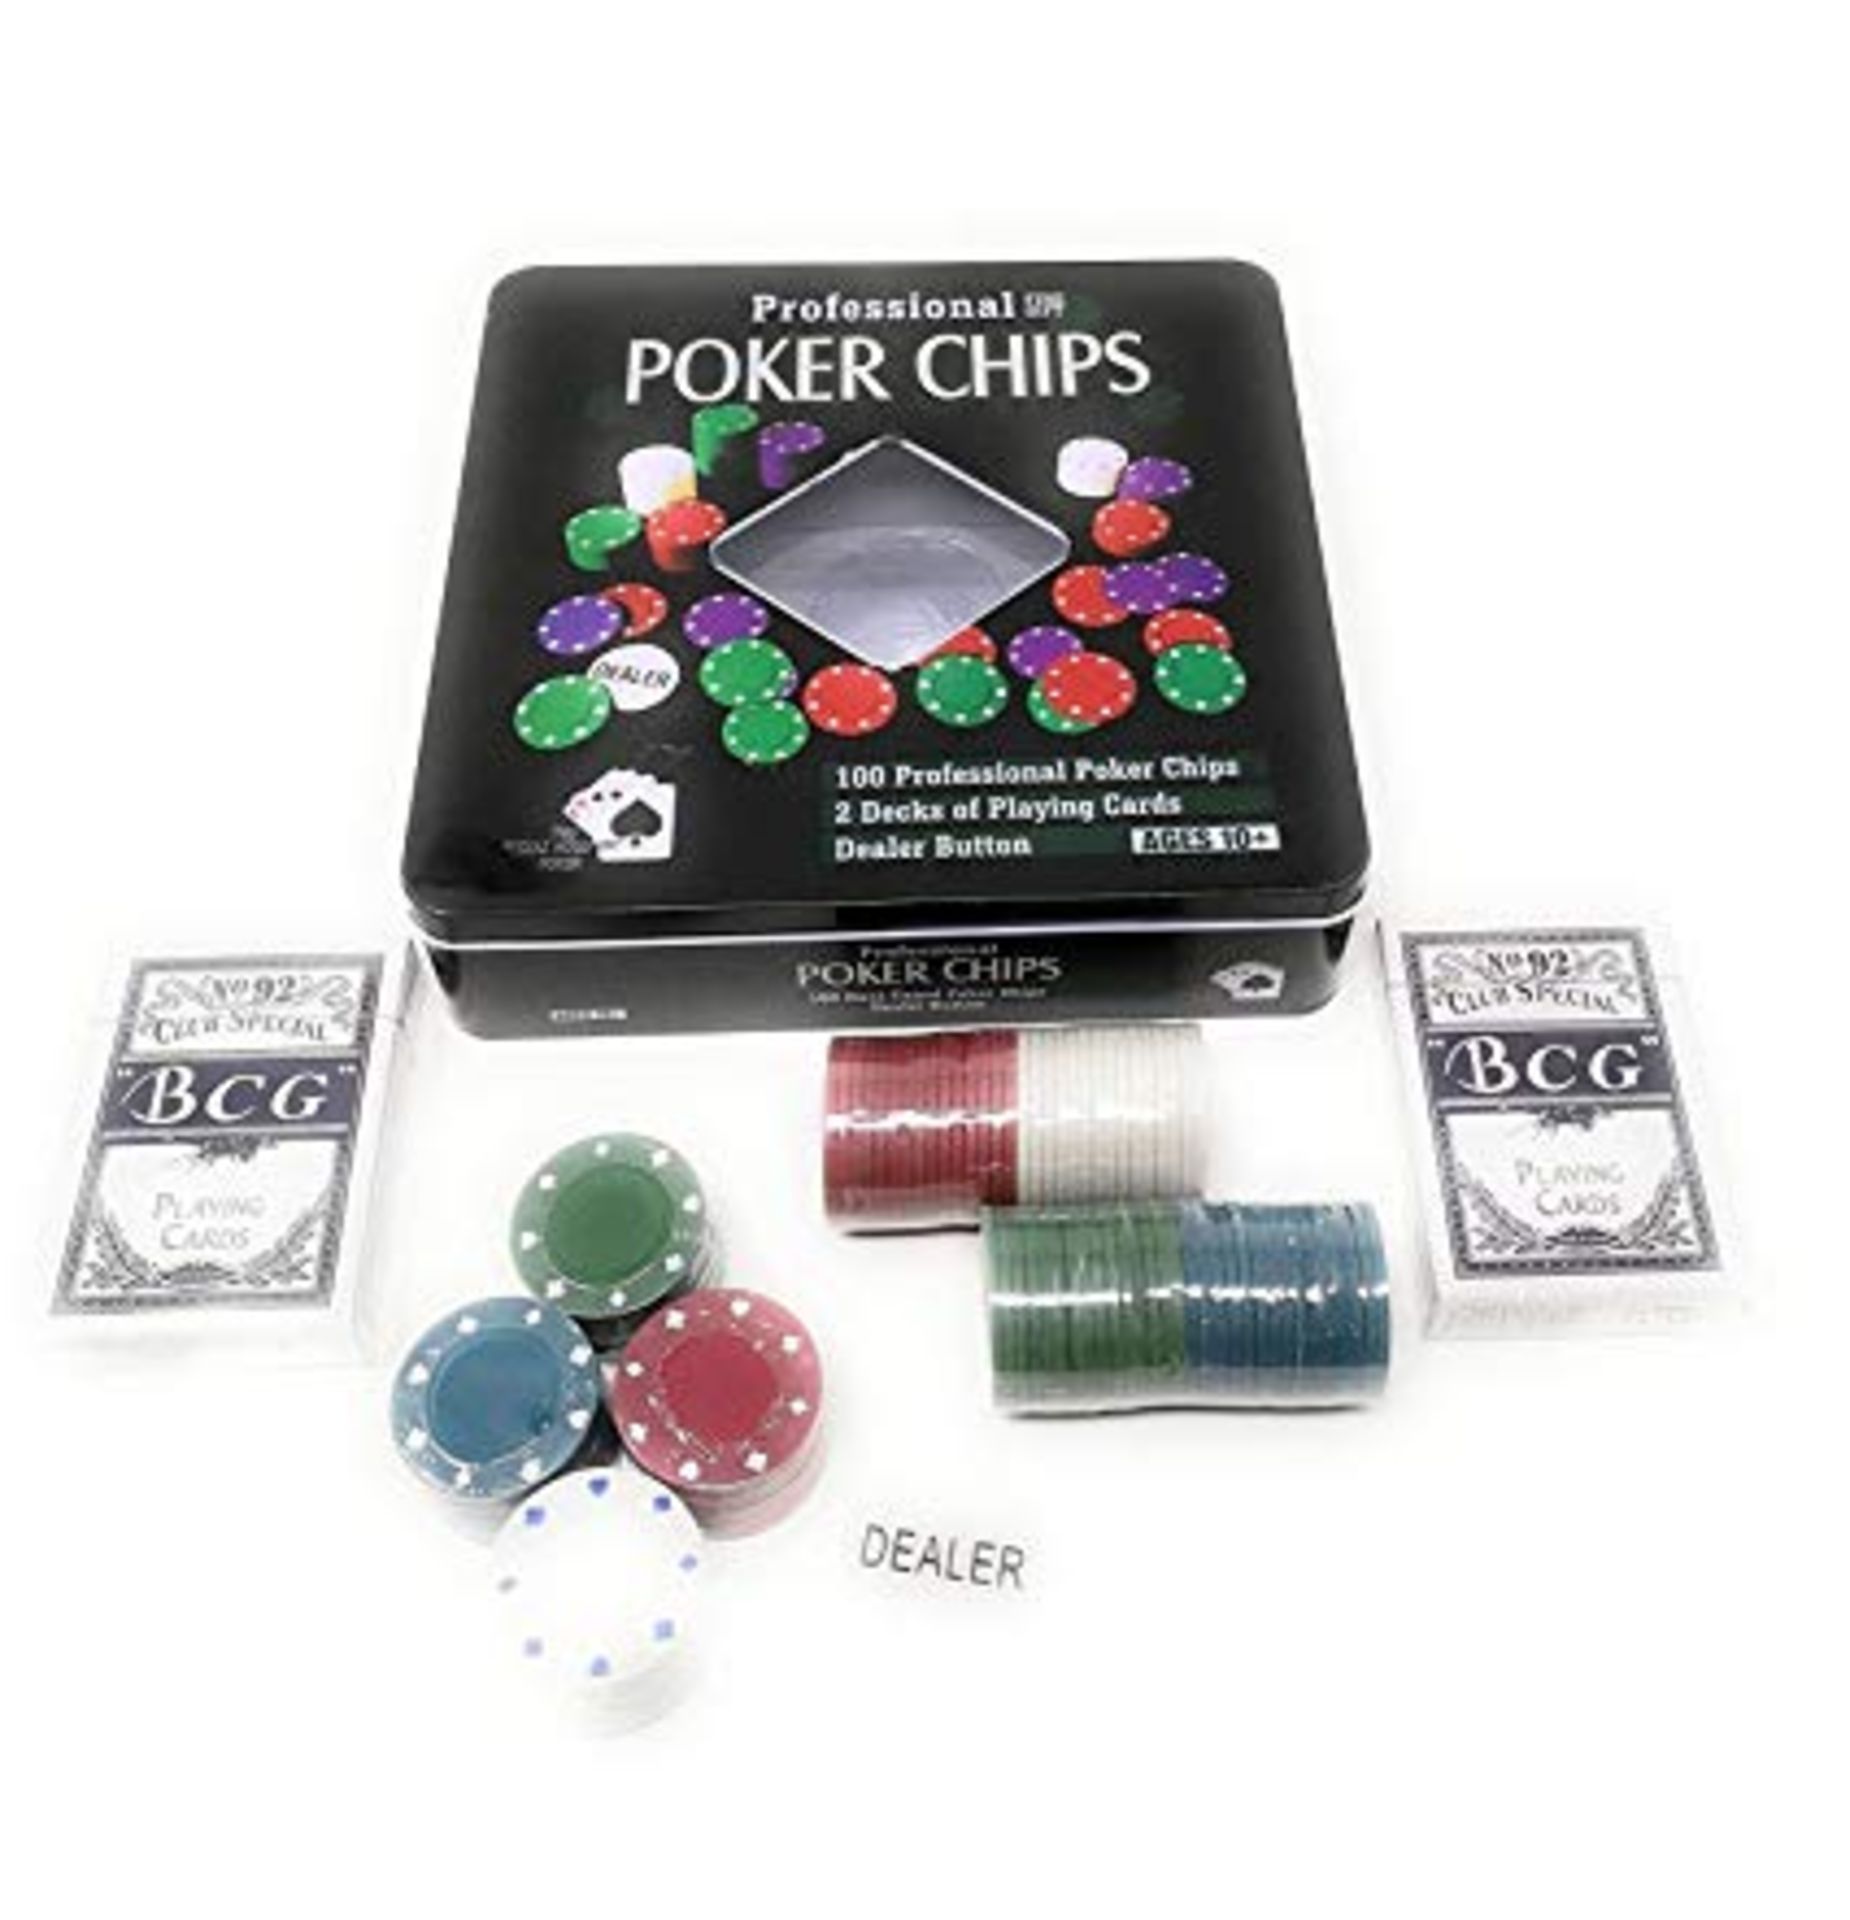 + VAT Brand New Pro Casino Bundle - 100 Poker Chips - 2 Packs Of Playing Cards - Dealer Button In A